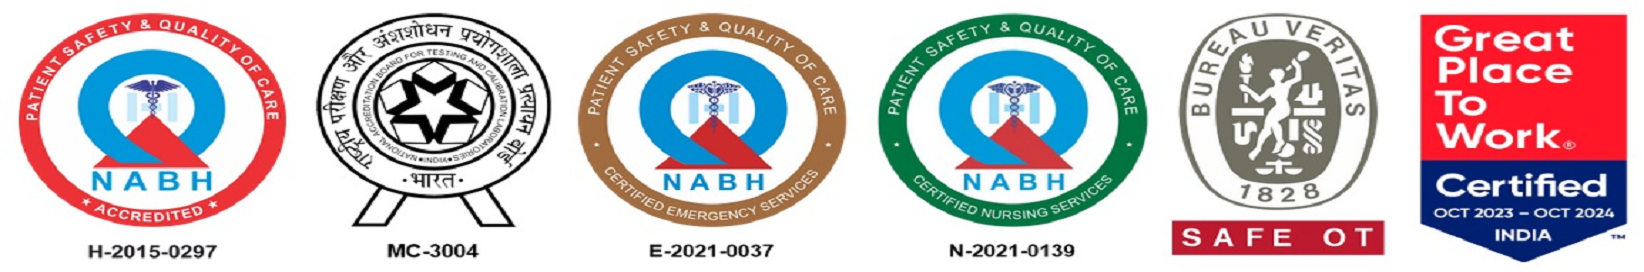 NABH (Certified Emergency Services)